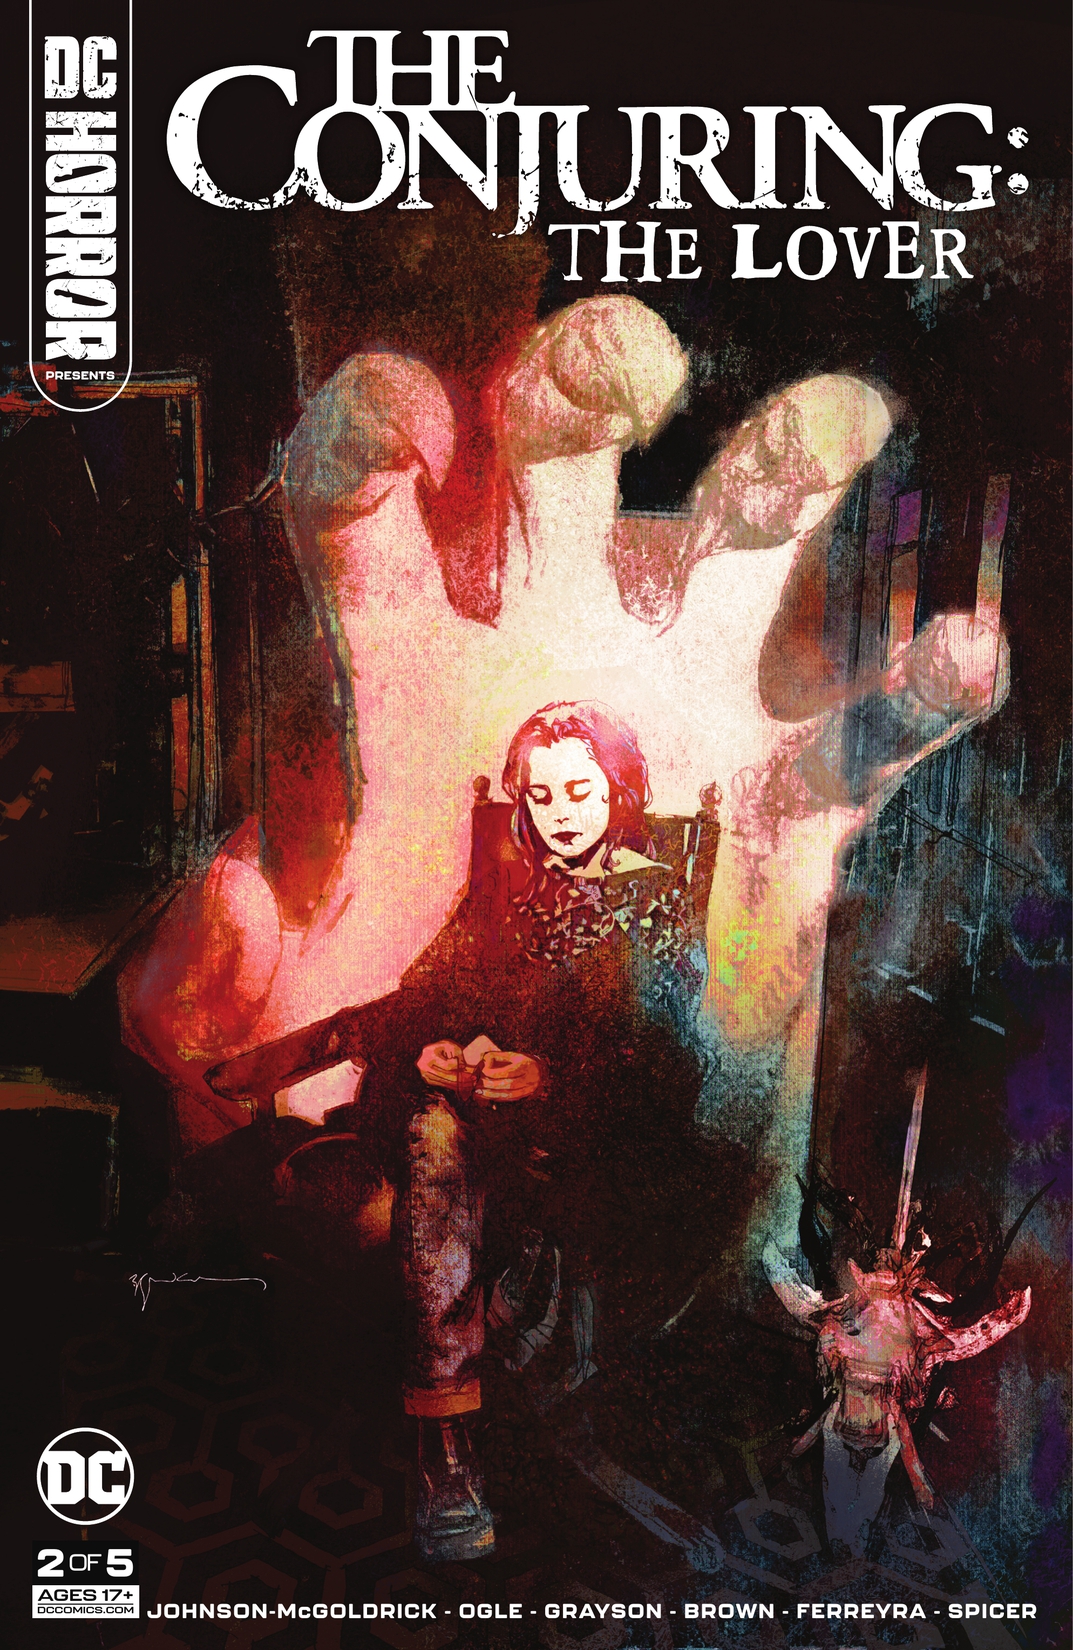 DC Horror Presents: The Conjuring: The Lover #2 preview images